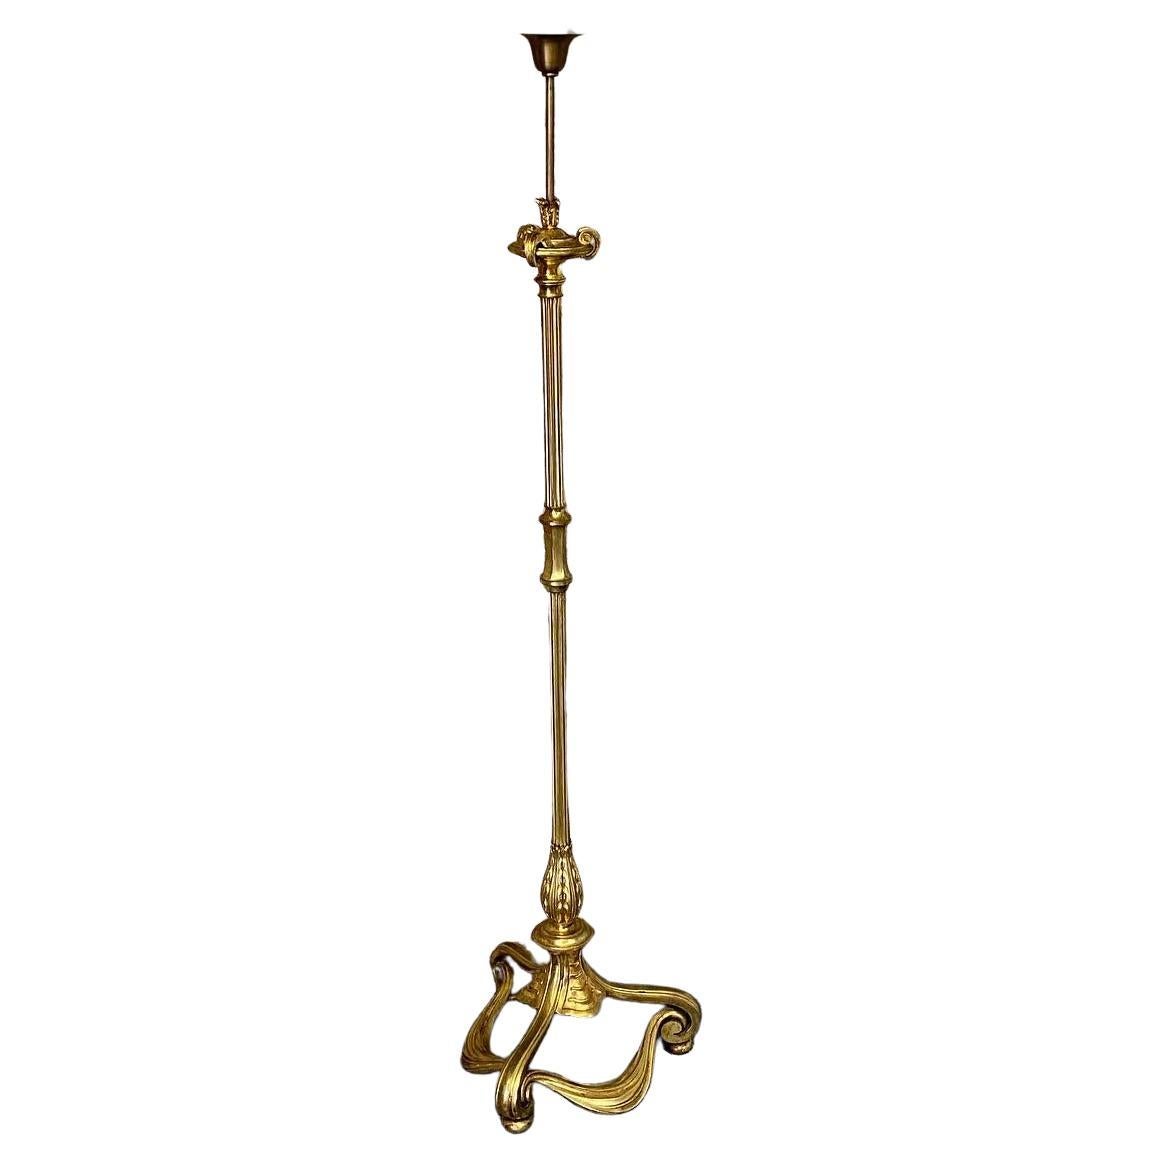 Wonderful Quality French Brass Standard Lamp For Sale